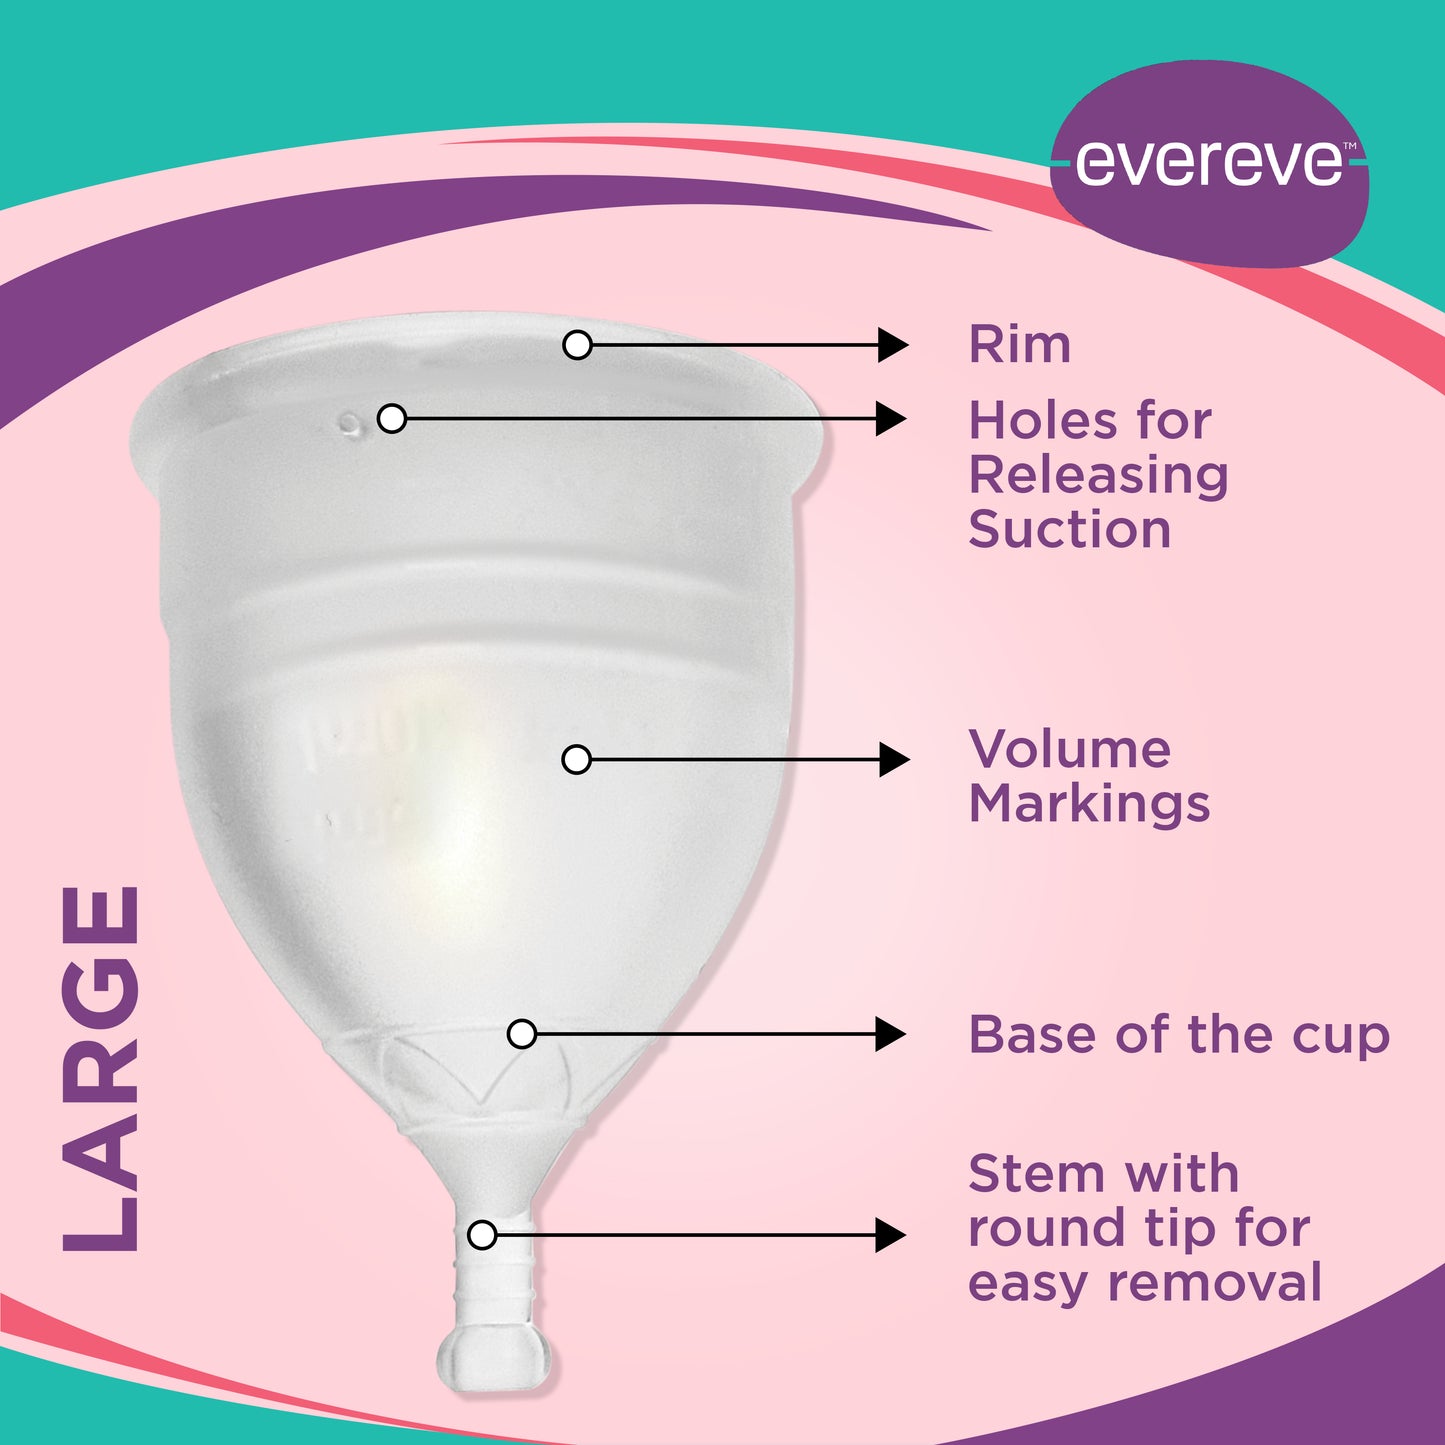 Evereve Menstrual Cup for Women, Large Size, 1 Pc,Transparent